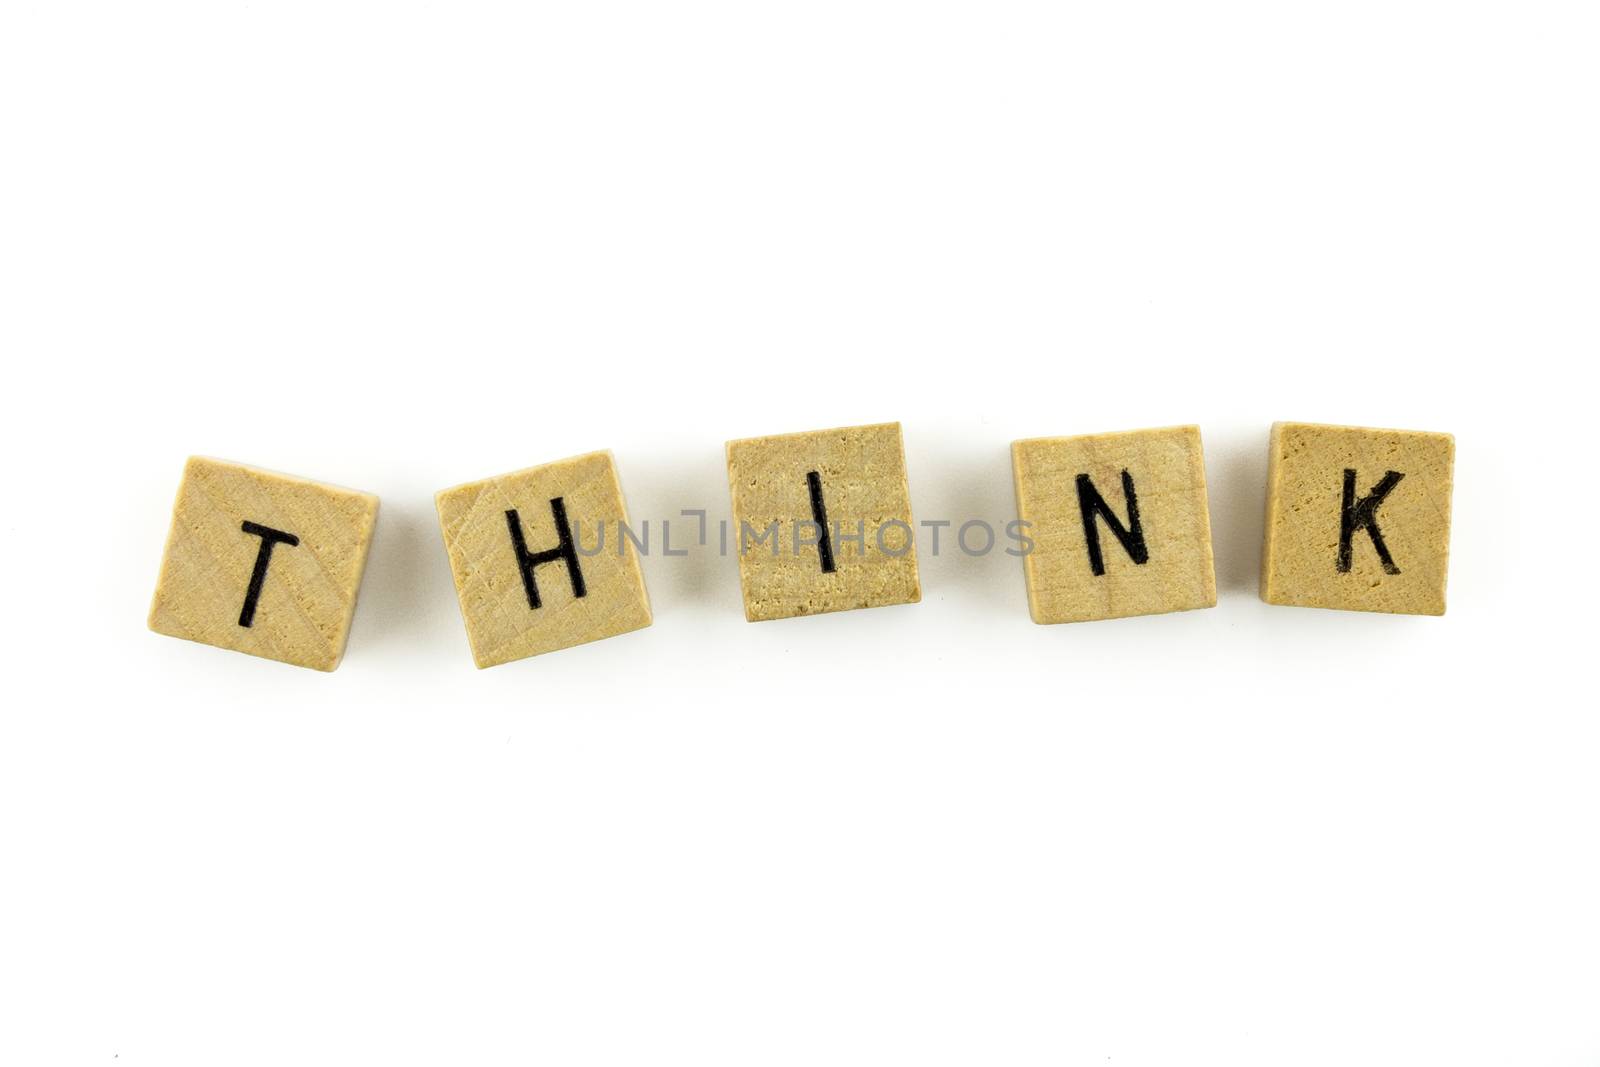 THINK word wooden alphabet blocks on white background from top view